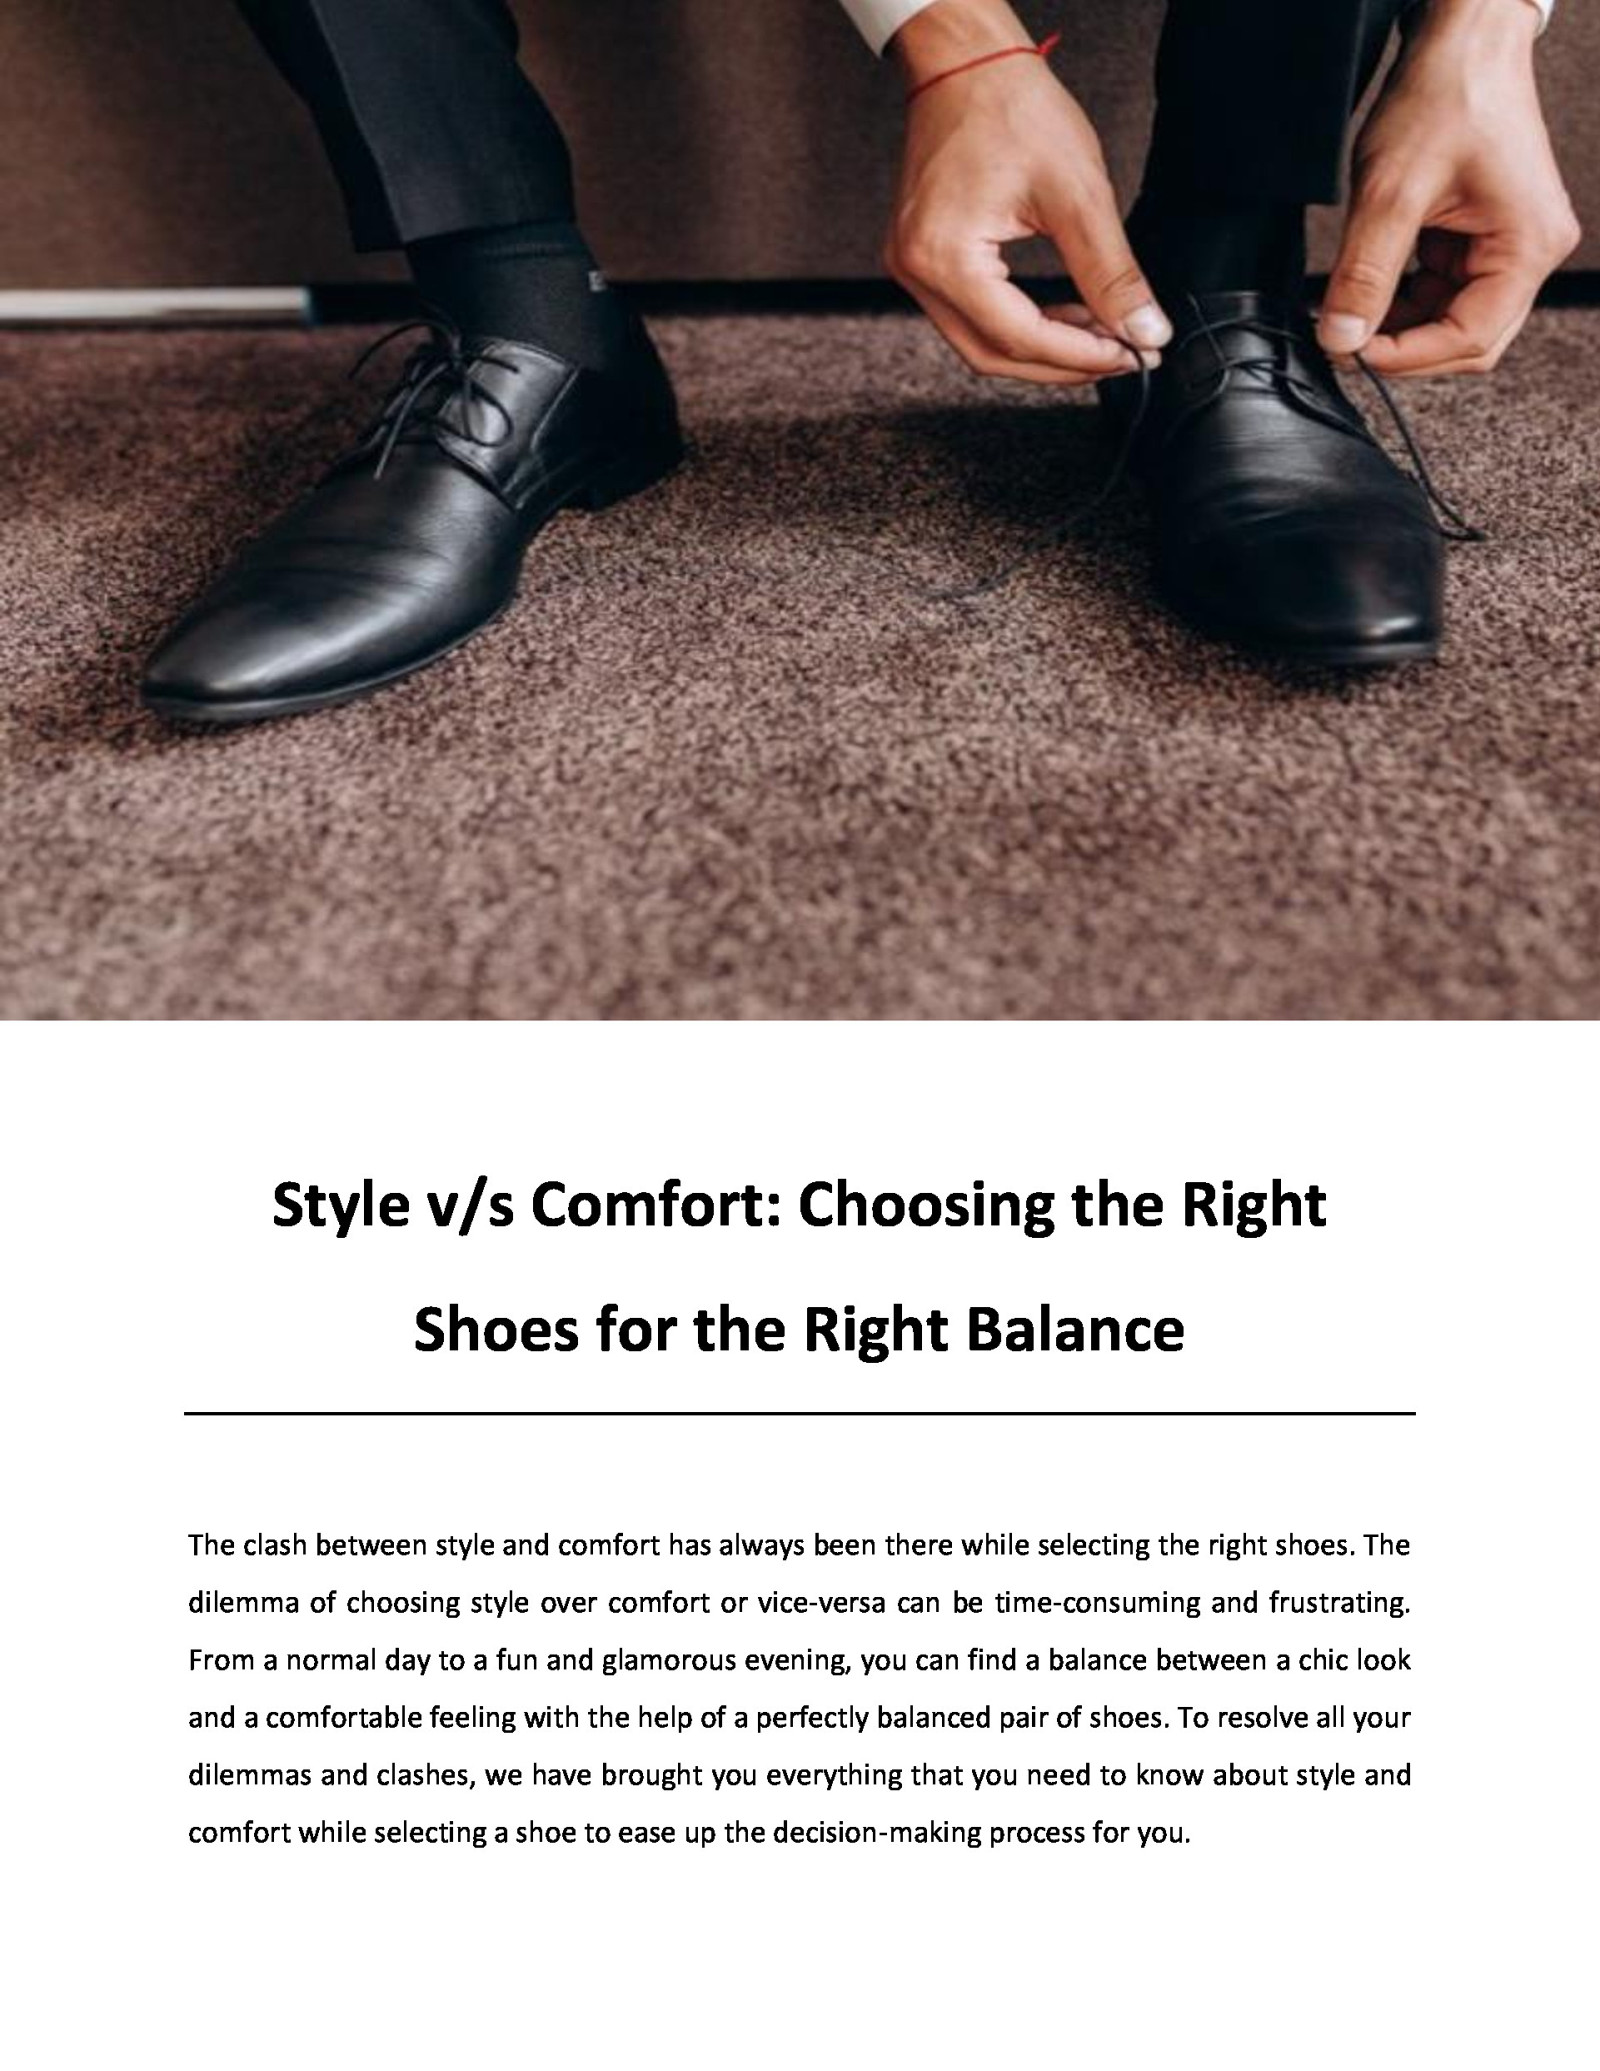 Style v/s Comfort: Choosing the Right Shoes for the Right Balance